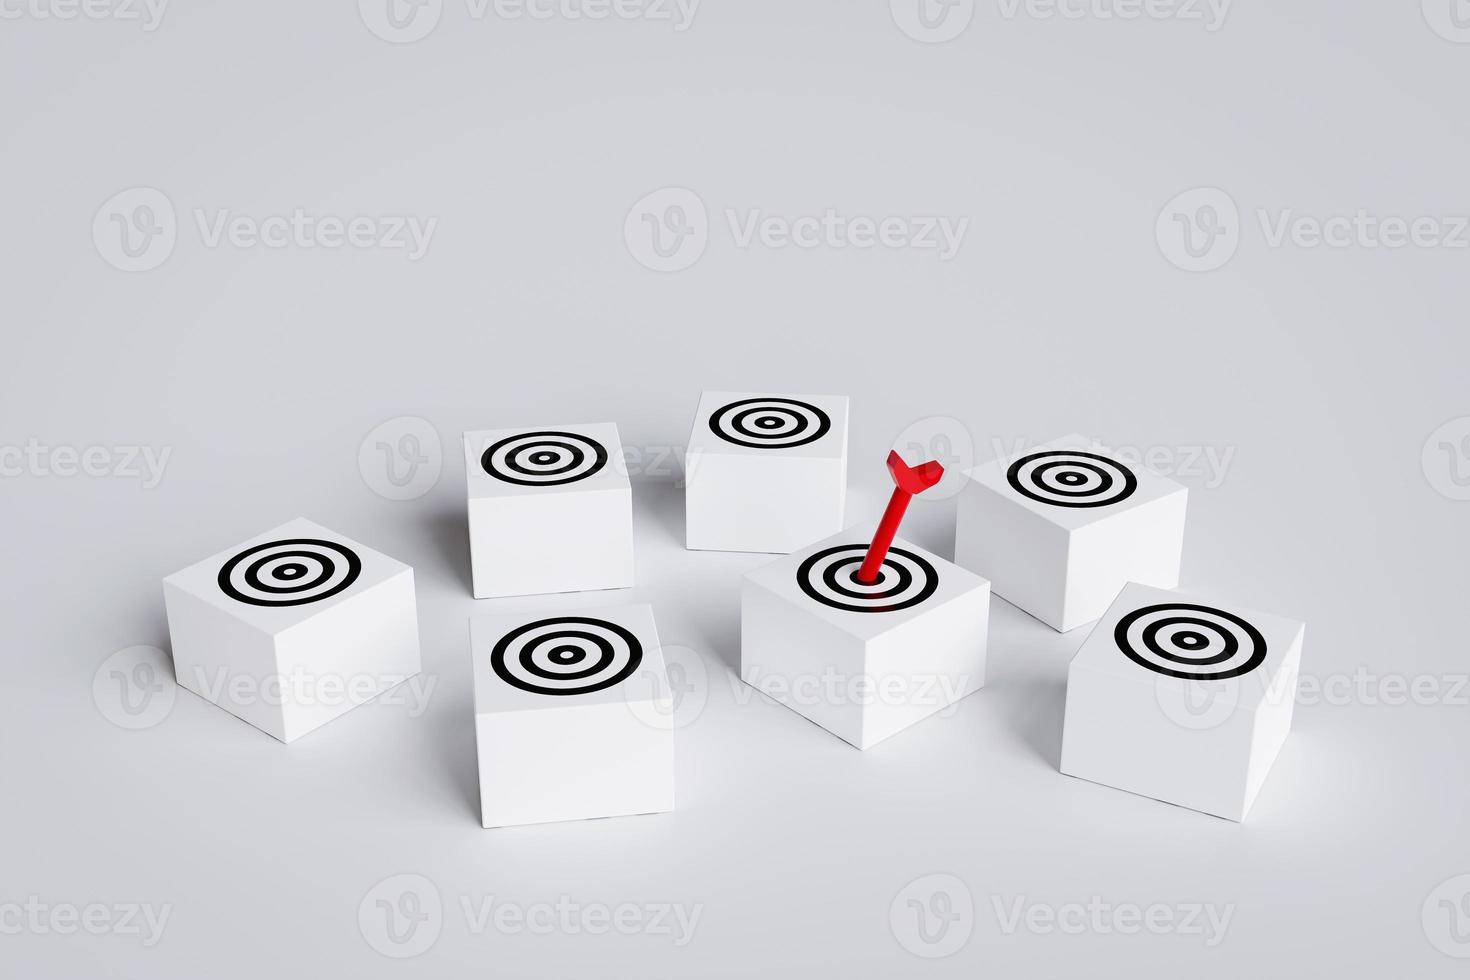 Arrows hit target on square block board with multiple targets. concept of business symbol target audience, selecting a target audience for business success, and achievement of objectives. photo